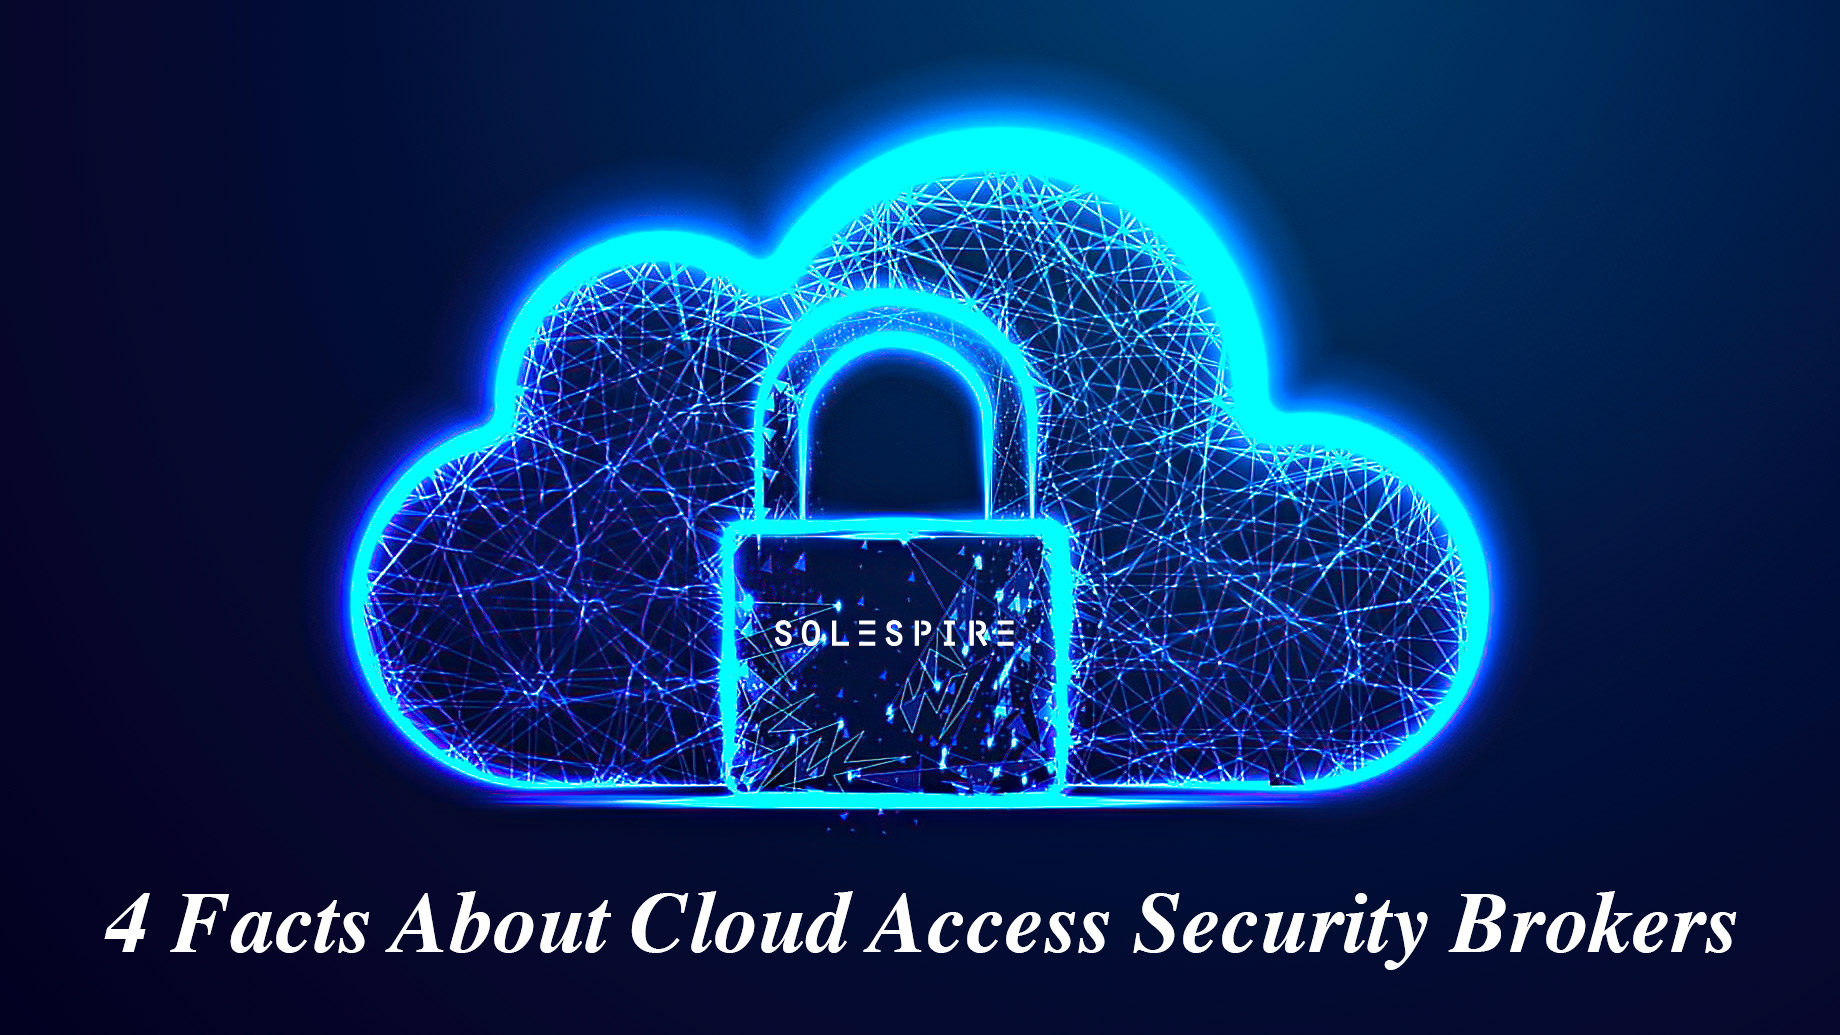 4 Facts About Cloud Access Security Brokers